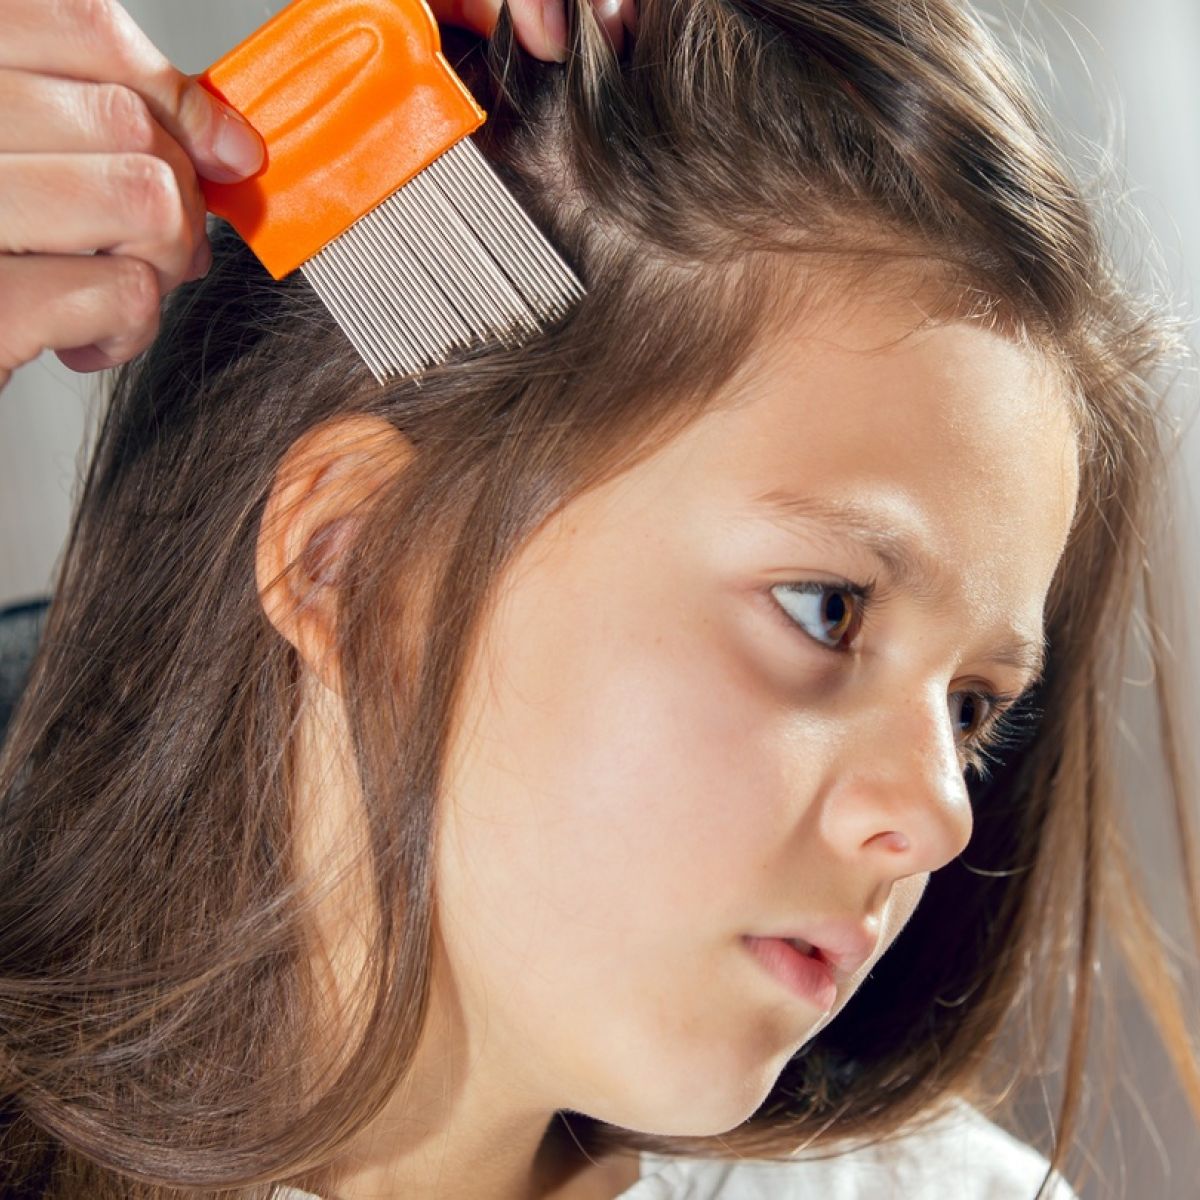 How to get rid of head lice in long hair What Is The Best Way To Tackle Head Lice